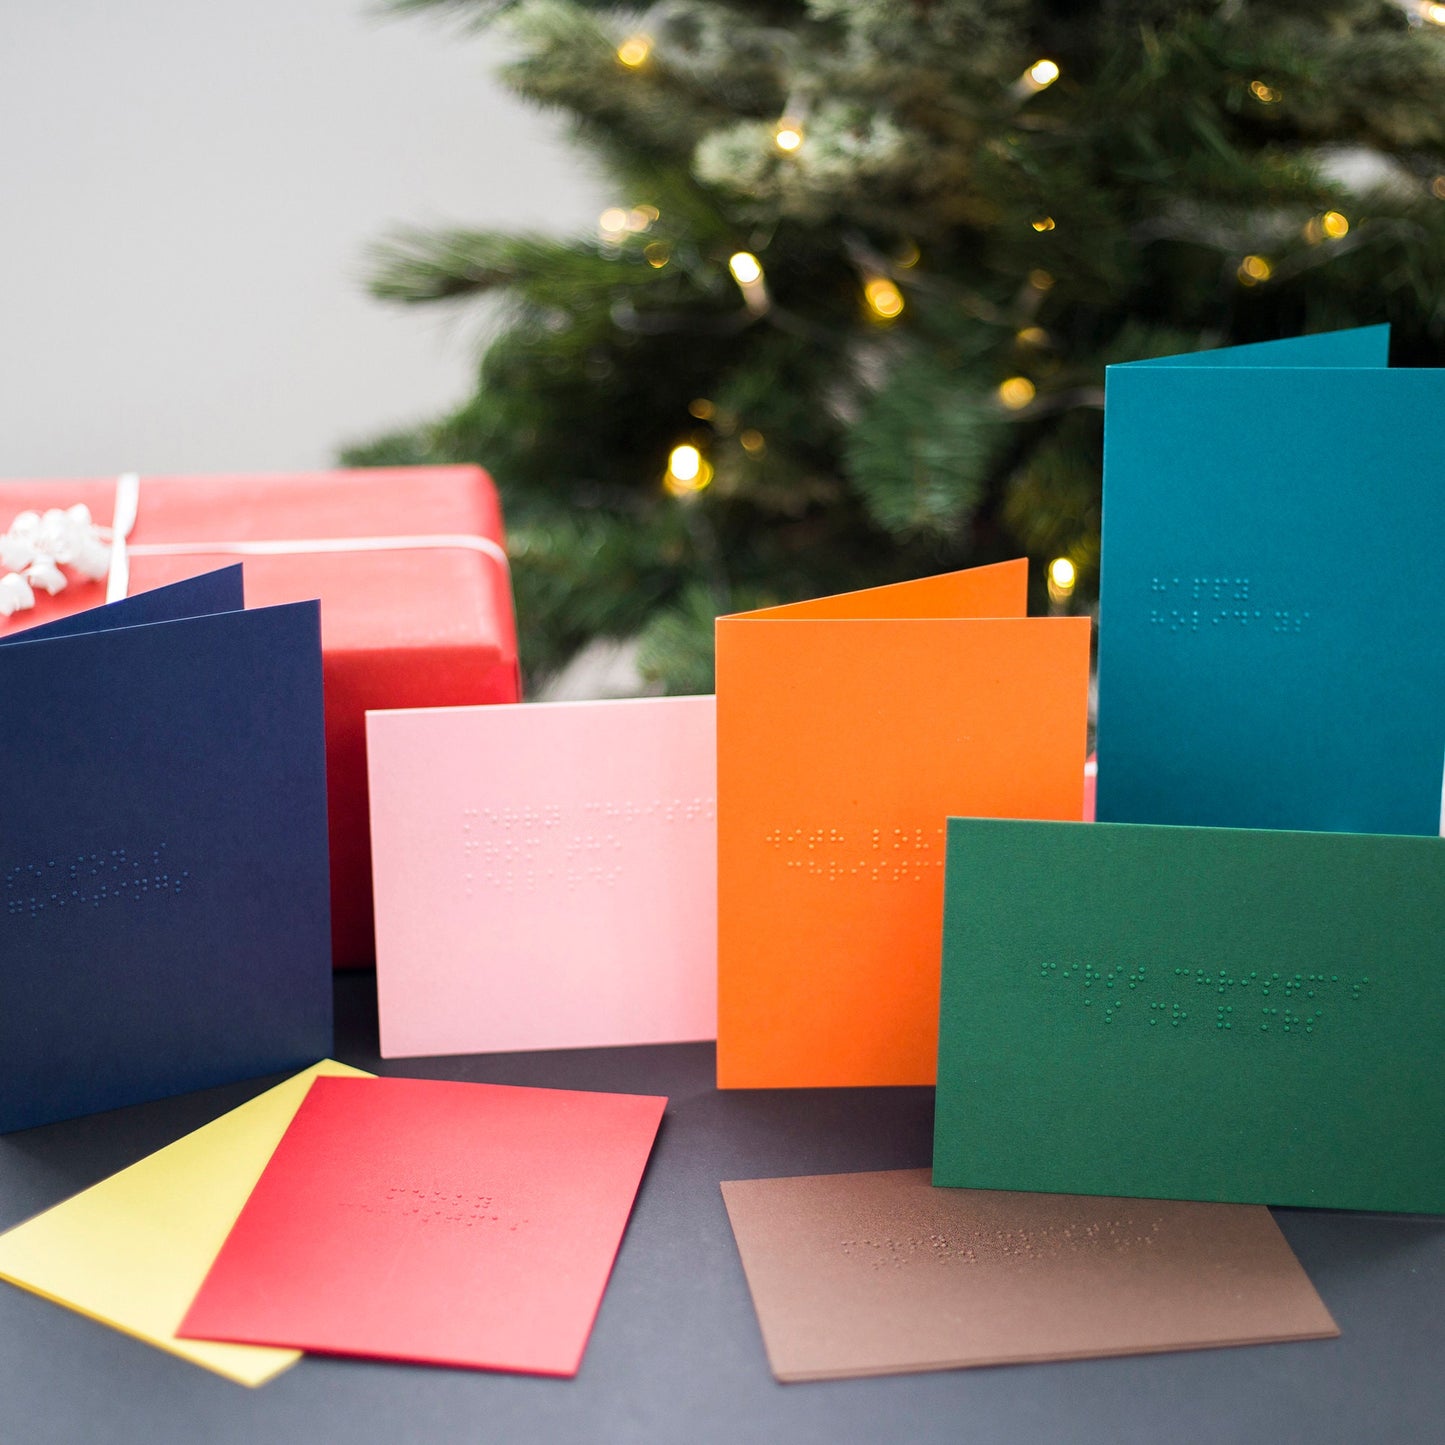 Braille Christmas cards in eight colours including red, green, pink, yellow, orange, teal, navy and chocolate.